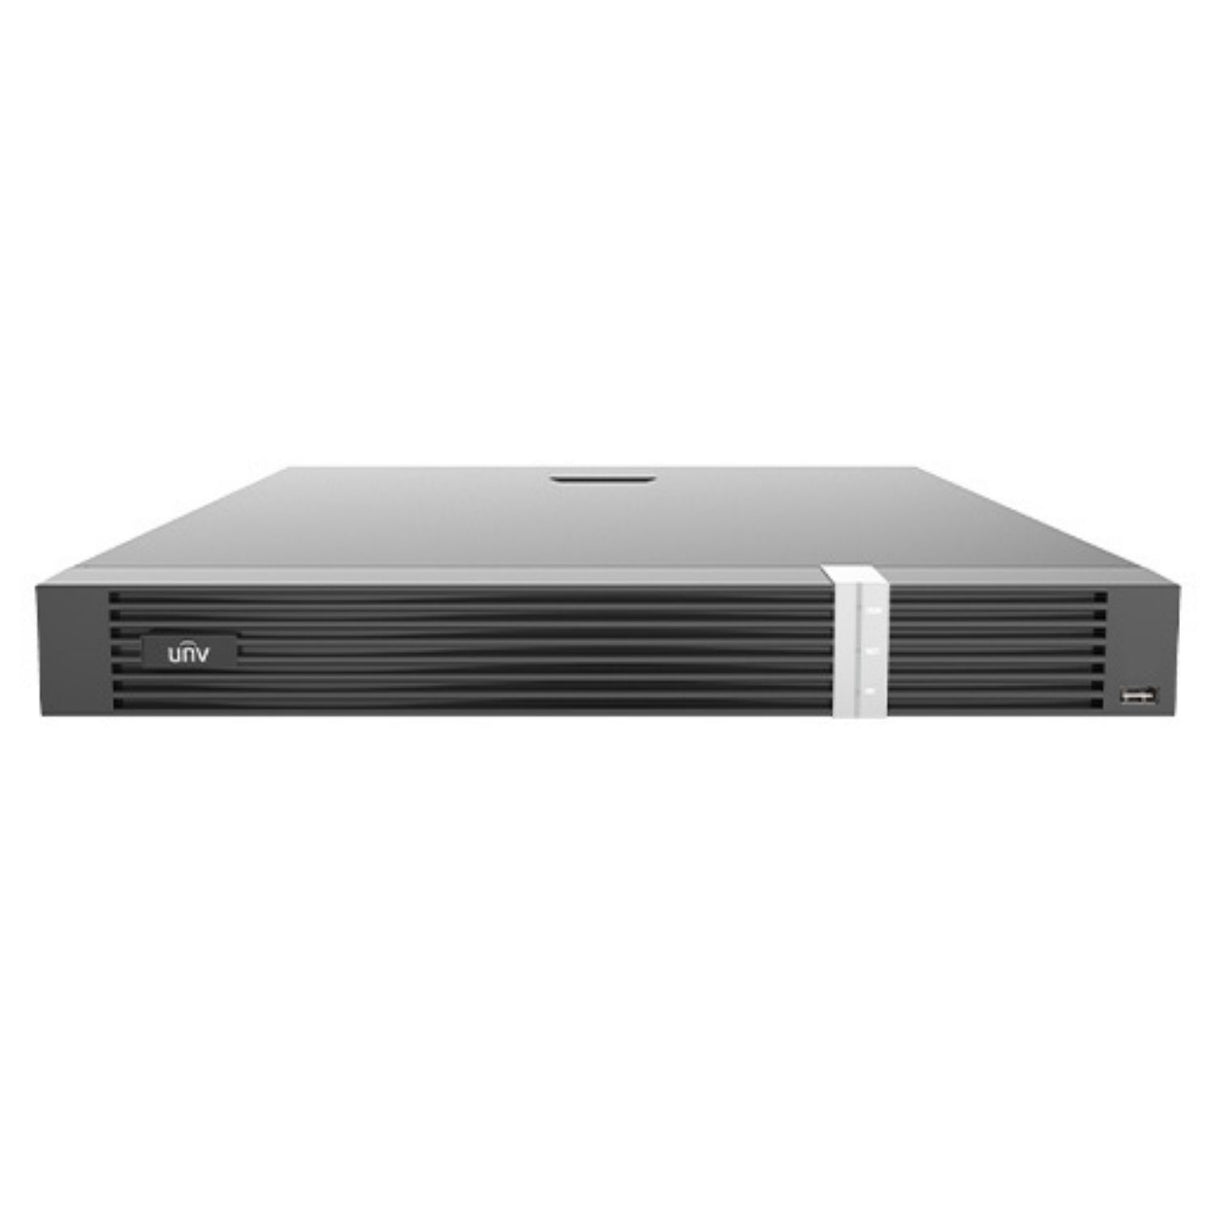 Uniview 8CH Network Video Recorder: upto 12MP, 160MBPS INPUT, 2-SATA HDD, Prime Series - NVR302-08E2-P8-IQ